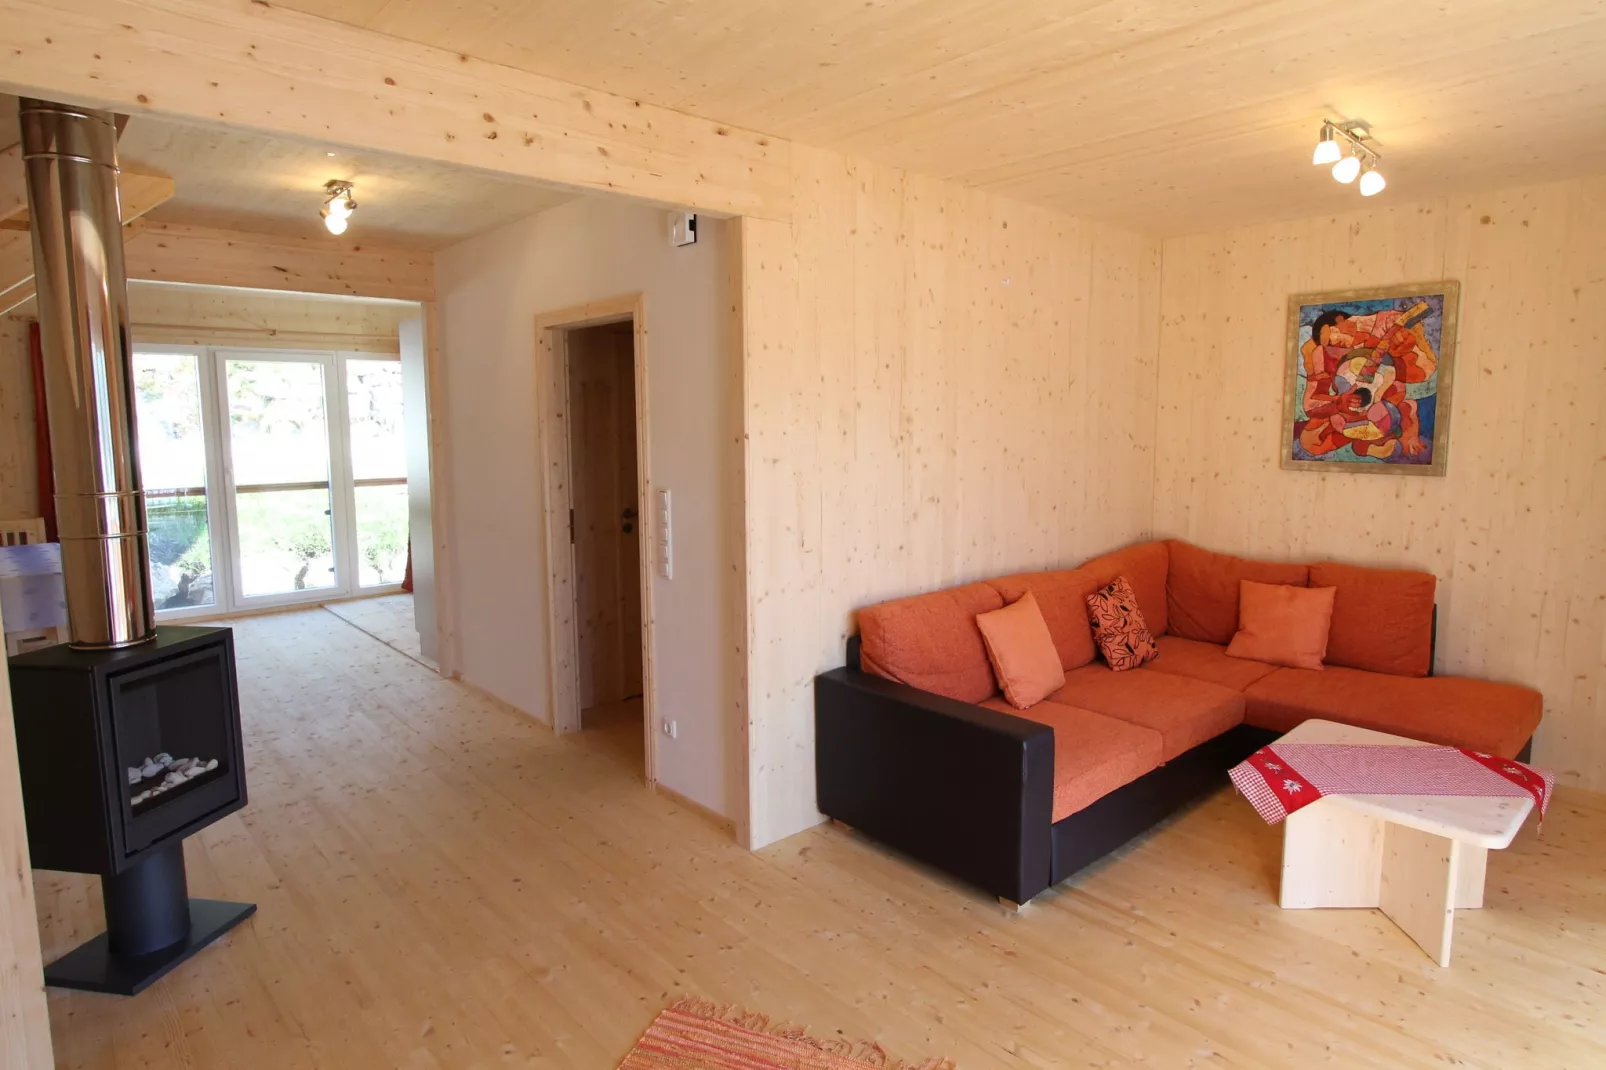 Chalet 45-Woonkamer